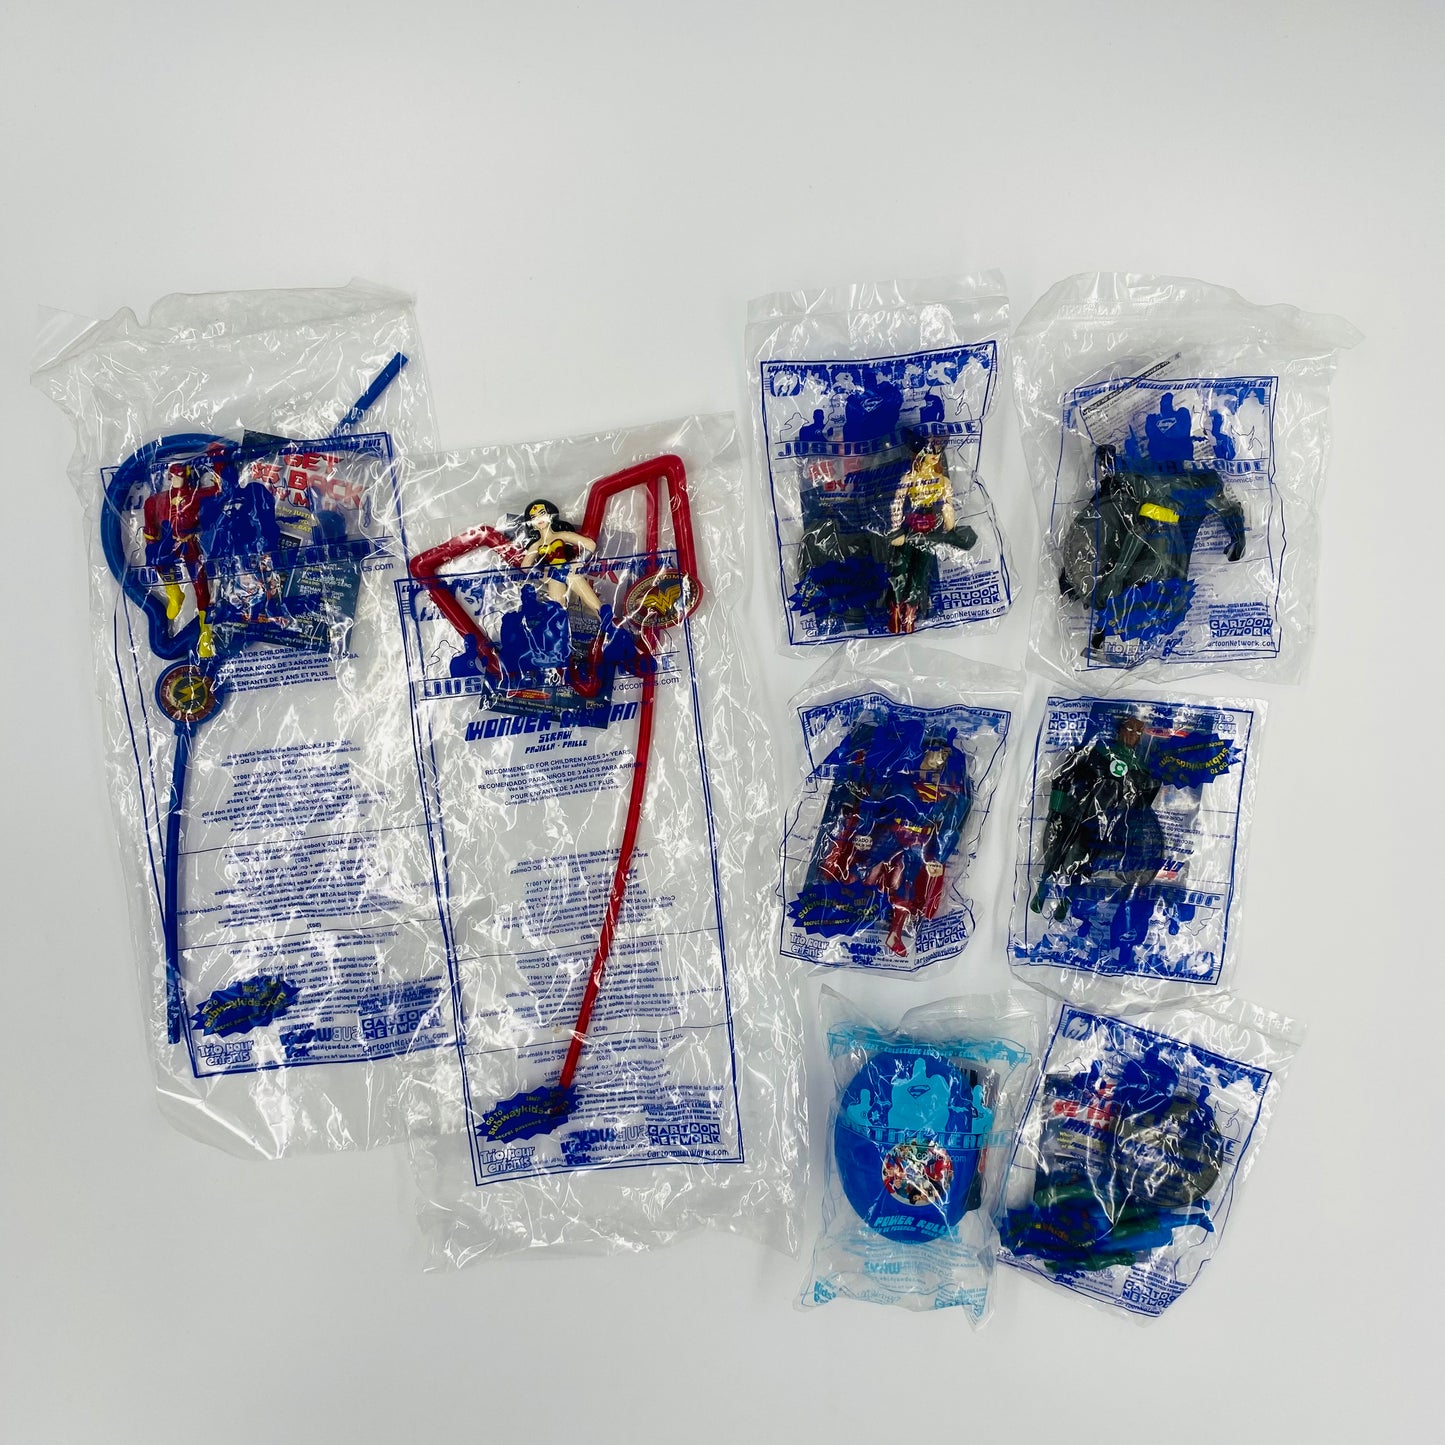 Justice League complete set of 8 Subway Kids’ Pak toys (2002) bagged